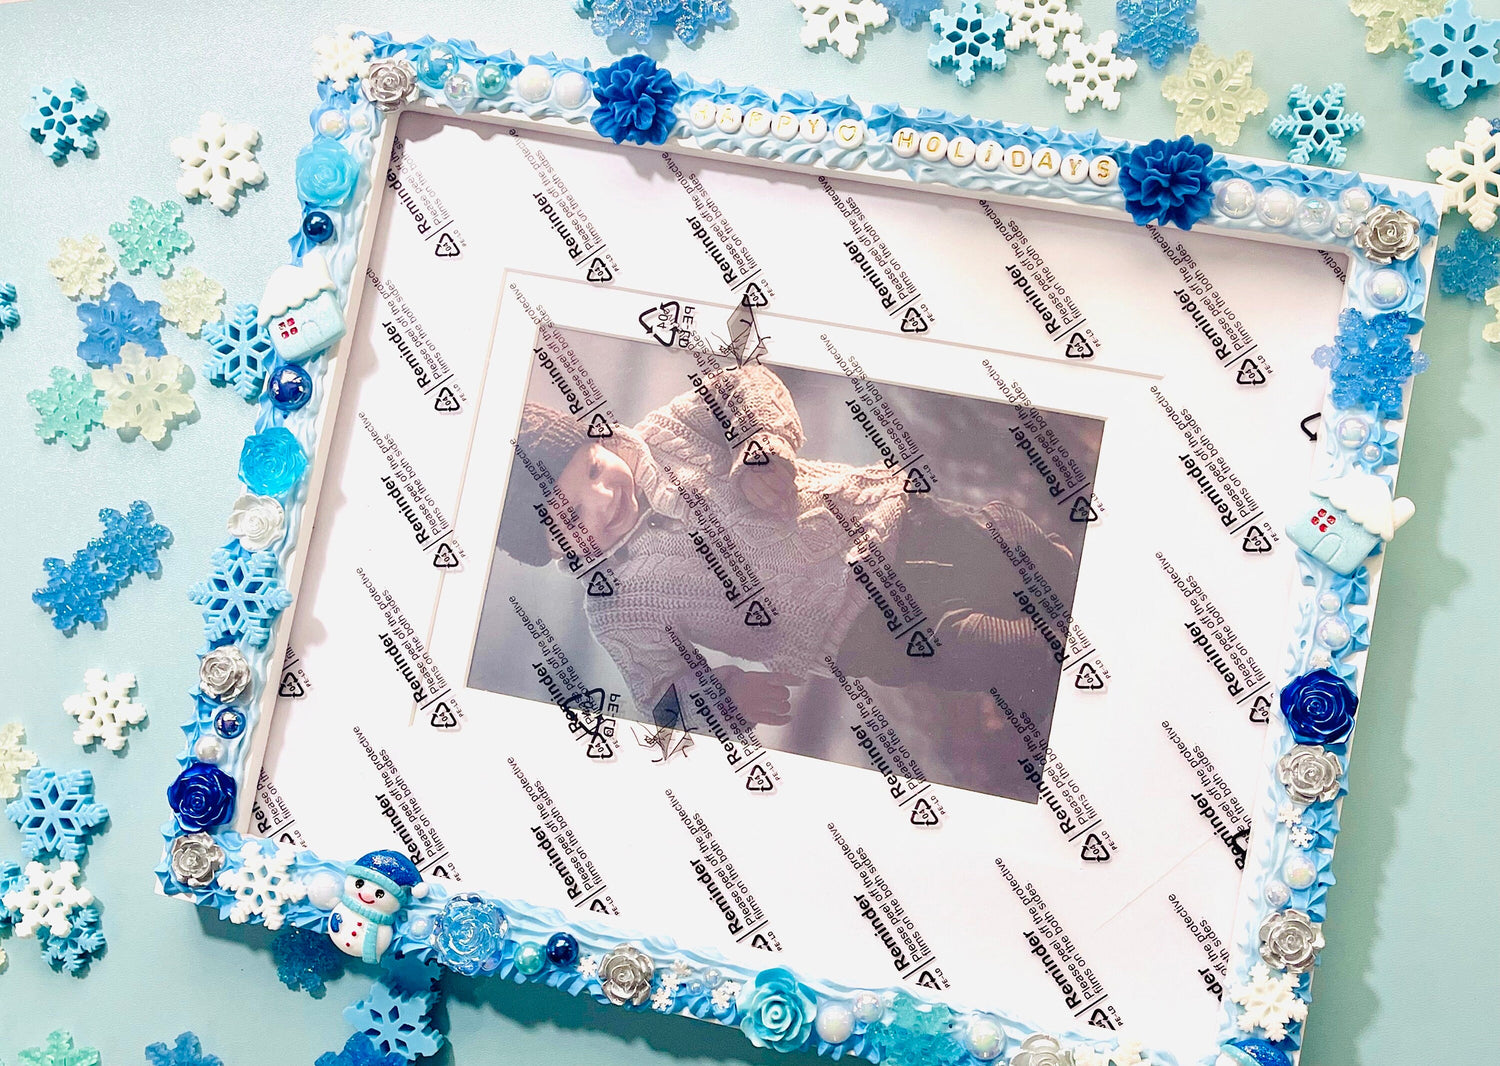 Blue and White Christmas 8x10 Picture Frame | White Christmas Picture Frame | Christmas Picture Frame - Inspired BYou Home Decor